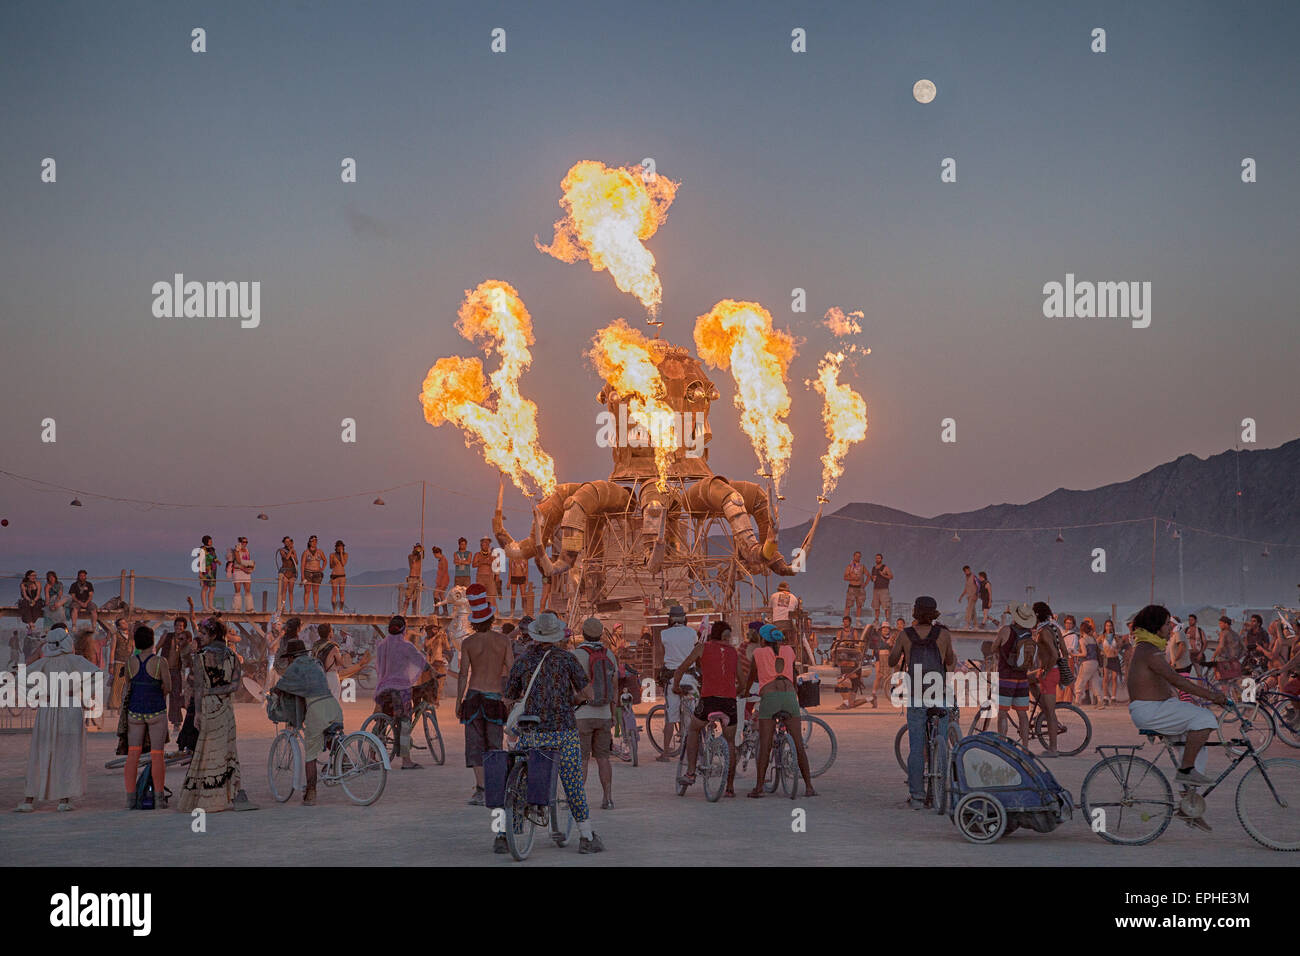 An art installation shoots flames in the desert during the annual Burning Man festival in the desert August 30, 2014 in Black Rock City, Nevada. Stock Photo